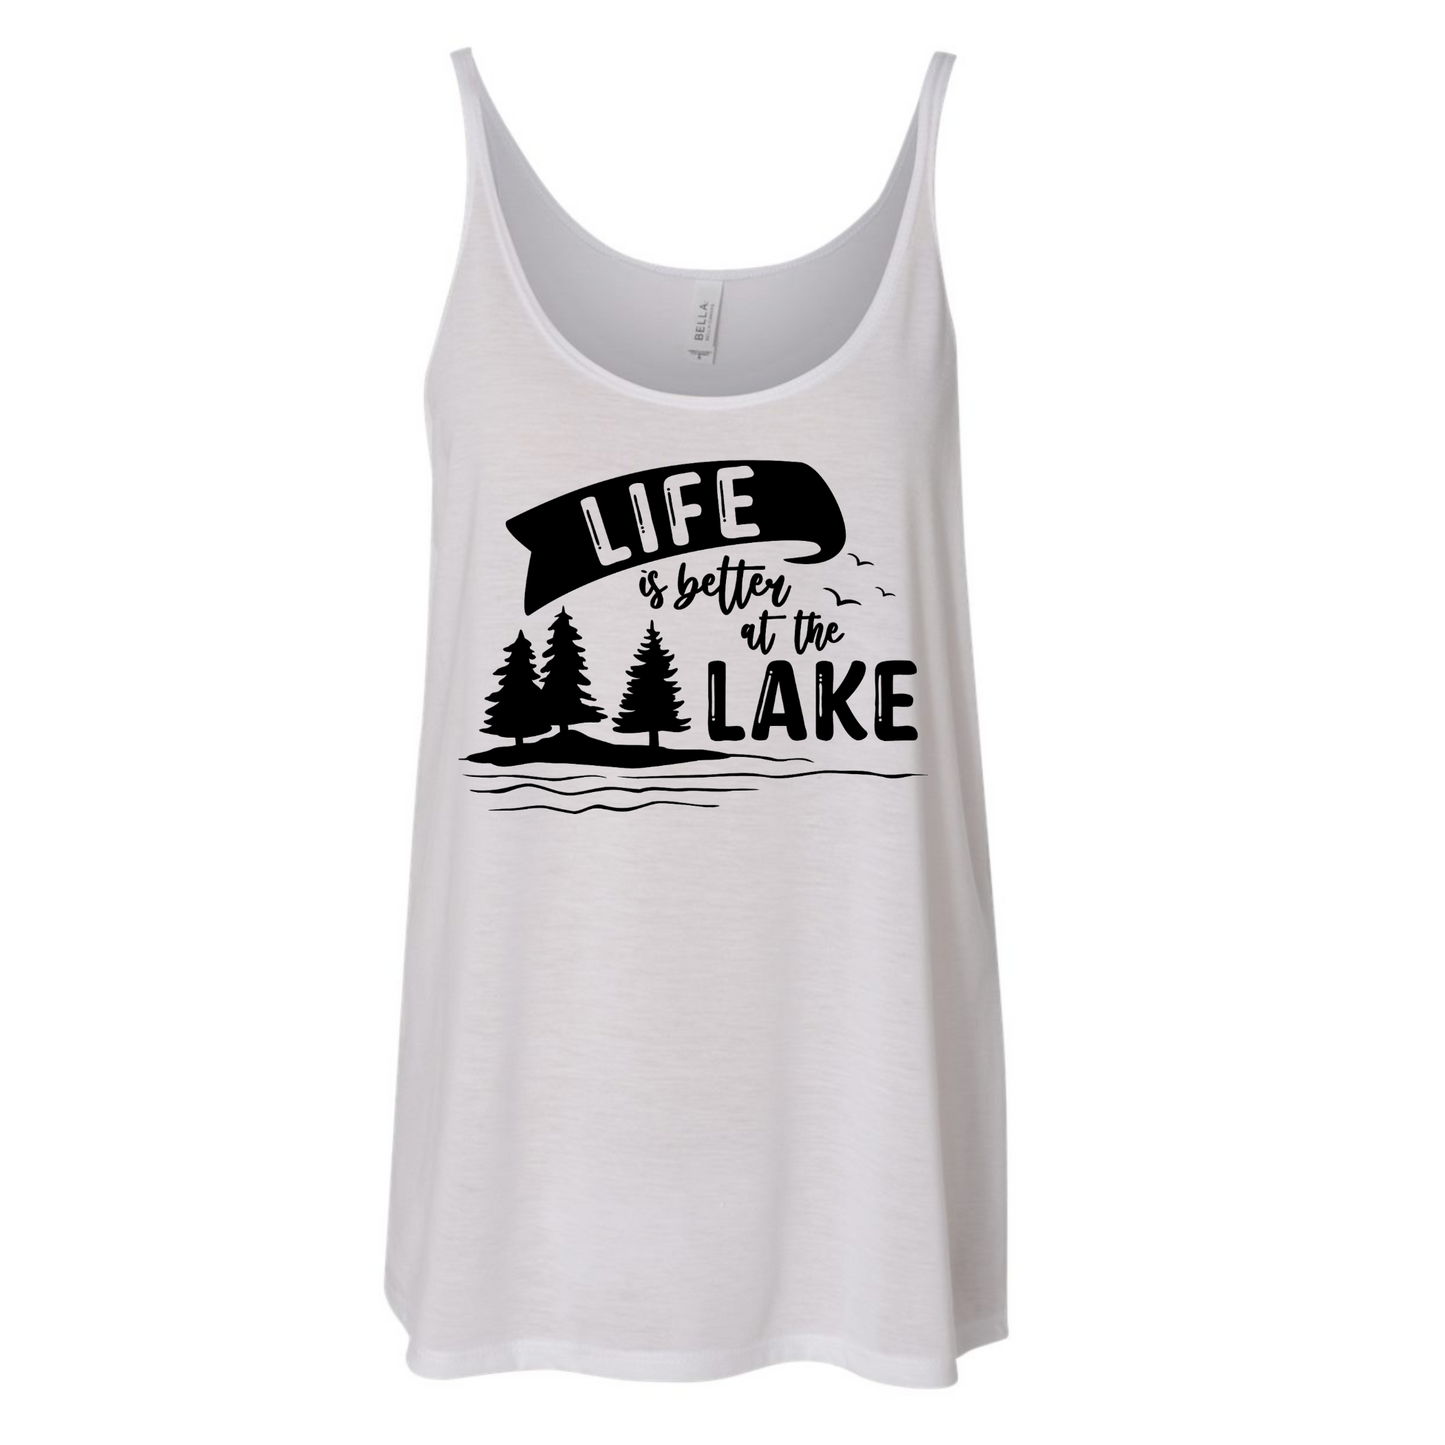 Life Is Better At The Lake Slouchy Tank Top - white - front view